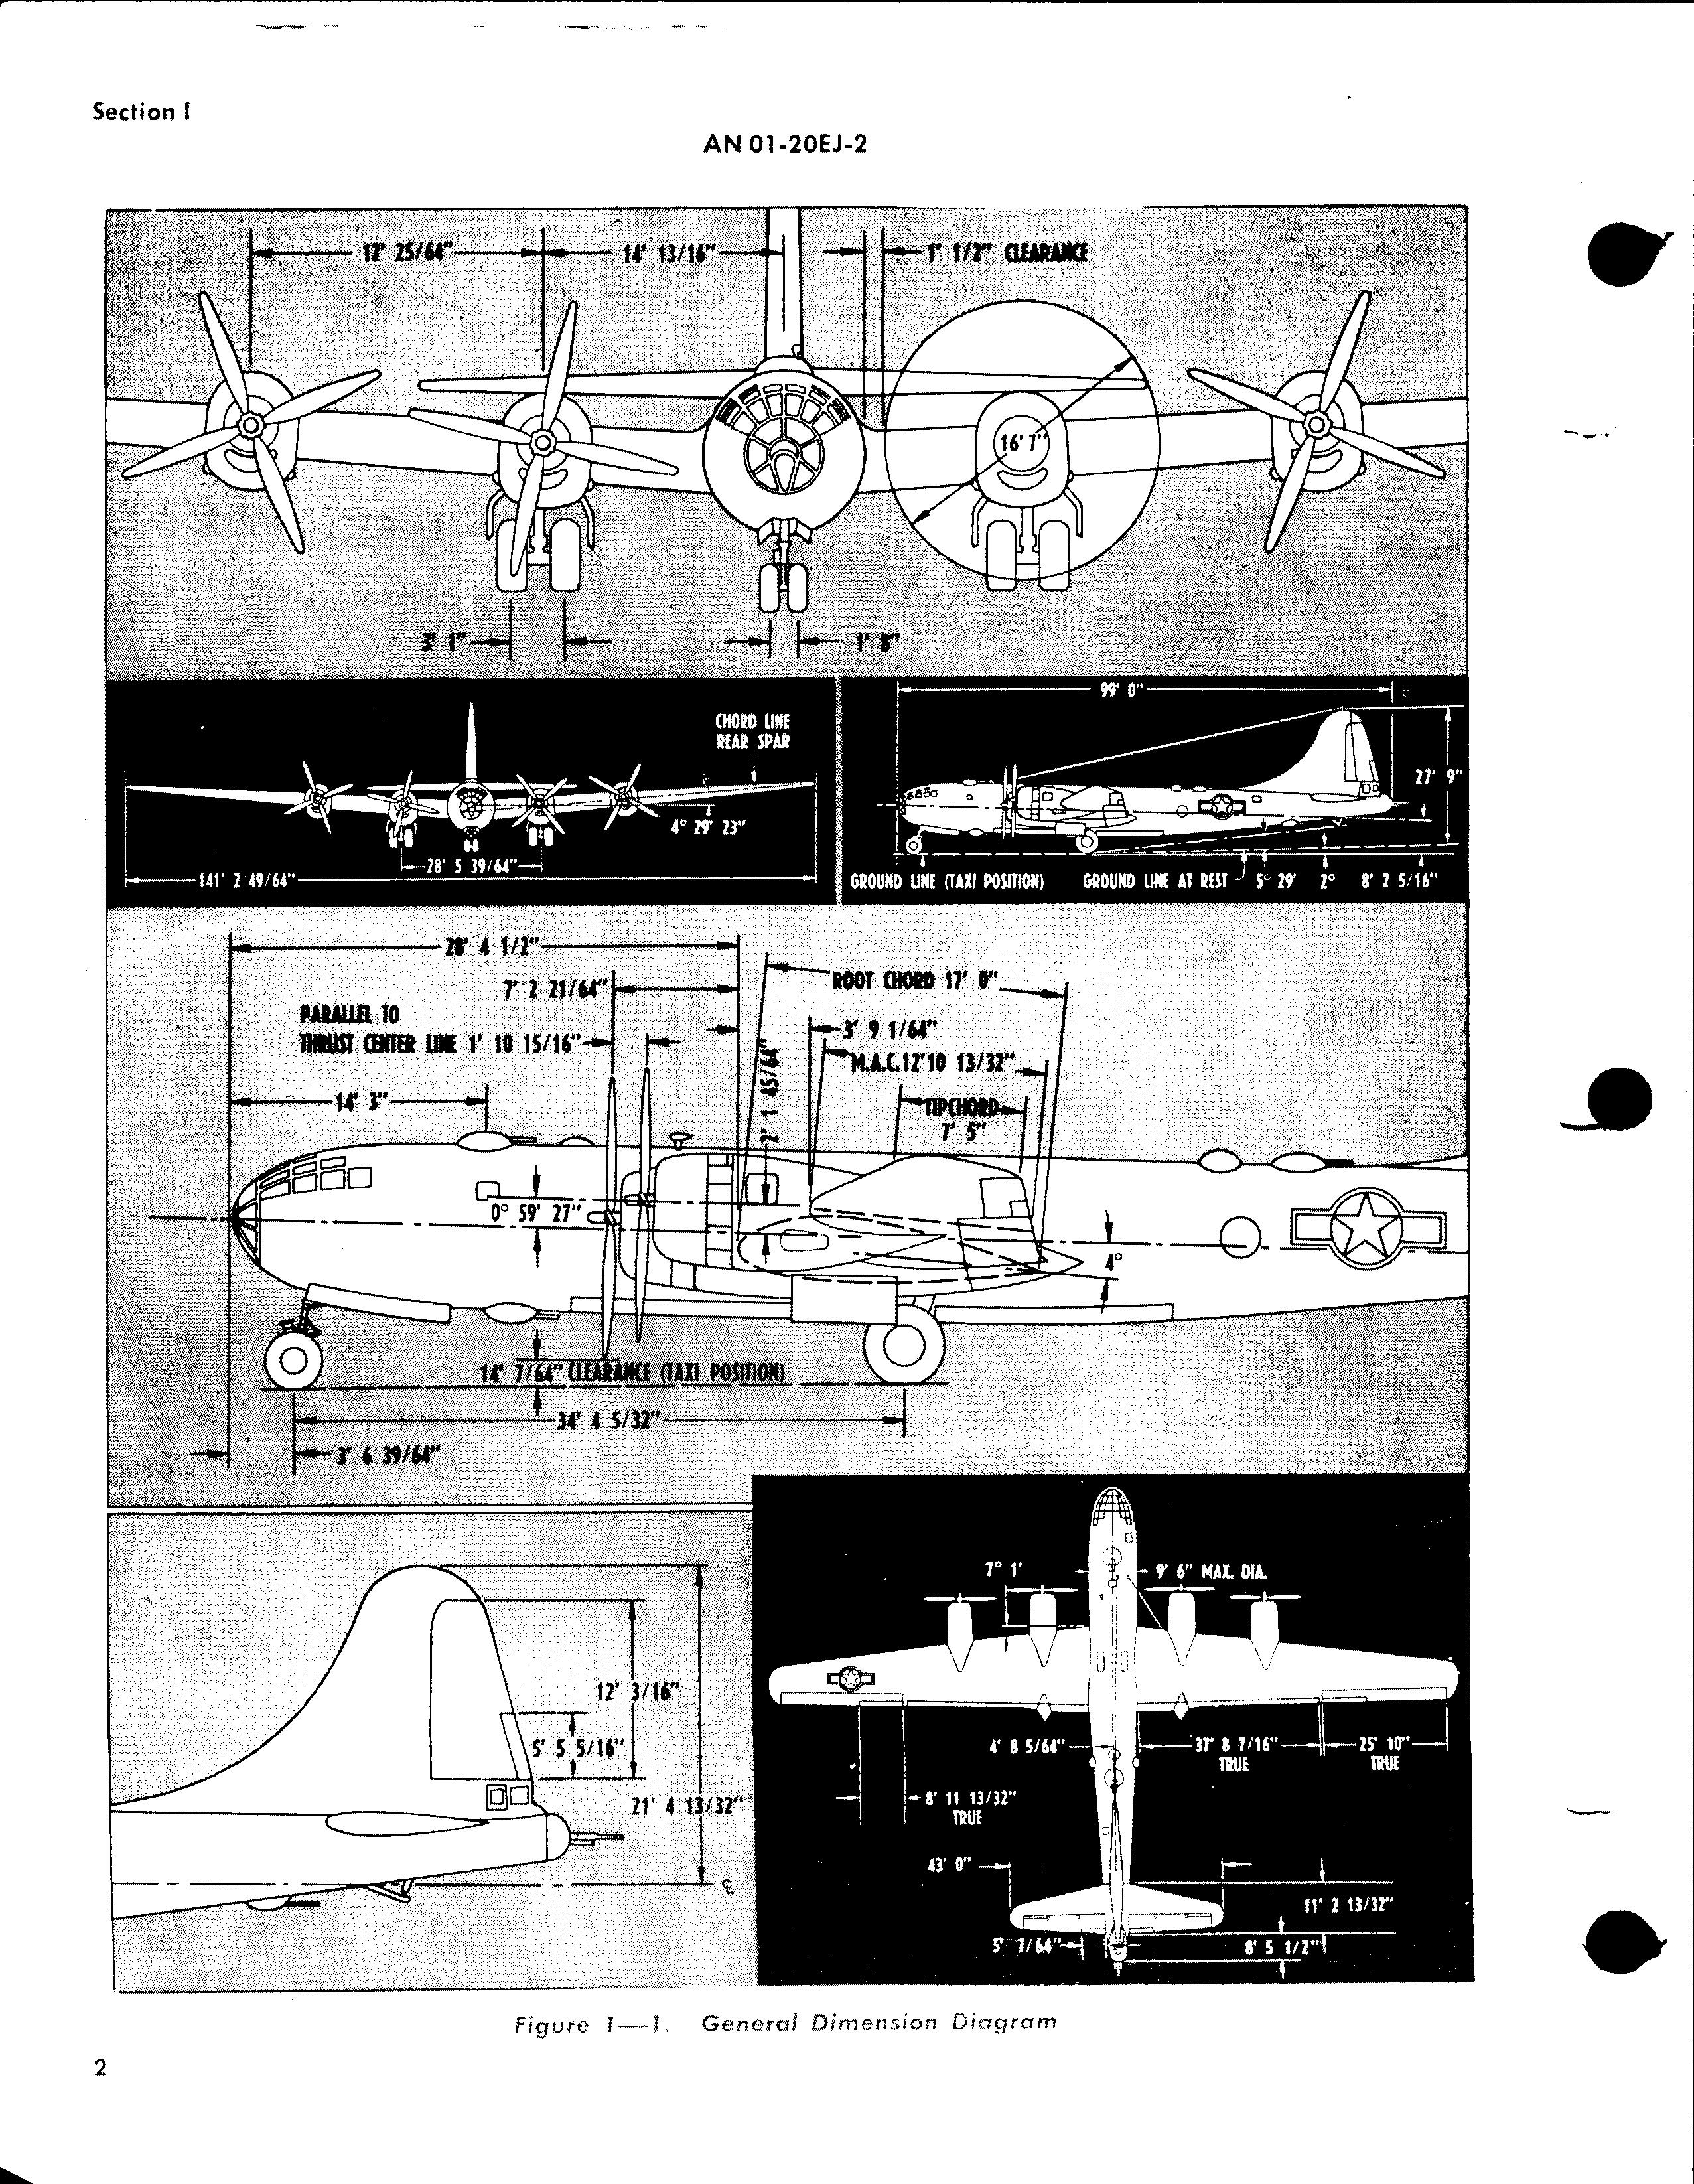 Sample page 6 from AirCorps Library document: Erection and Maintenance Instructions for the B-29 and B-29A